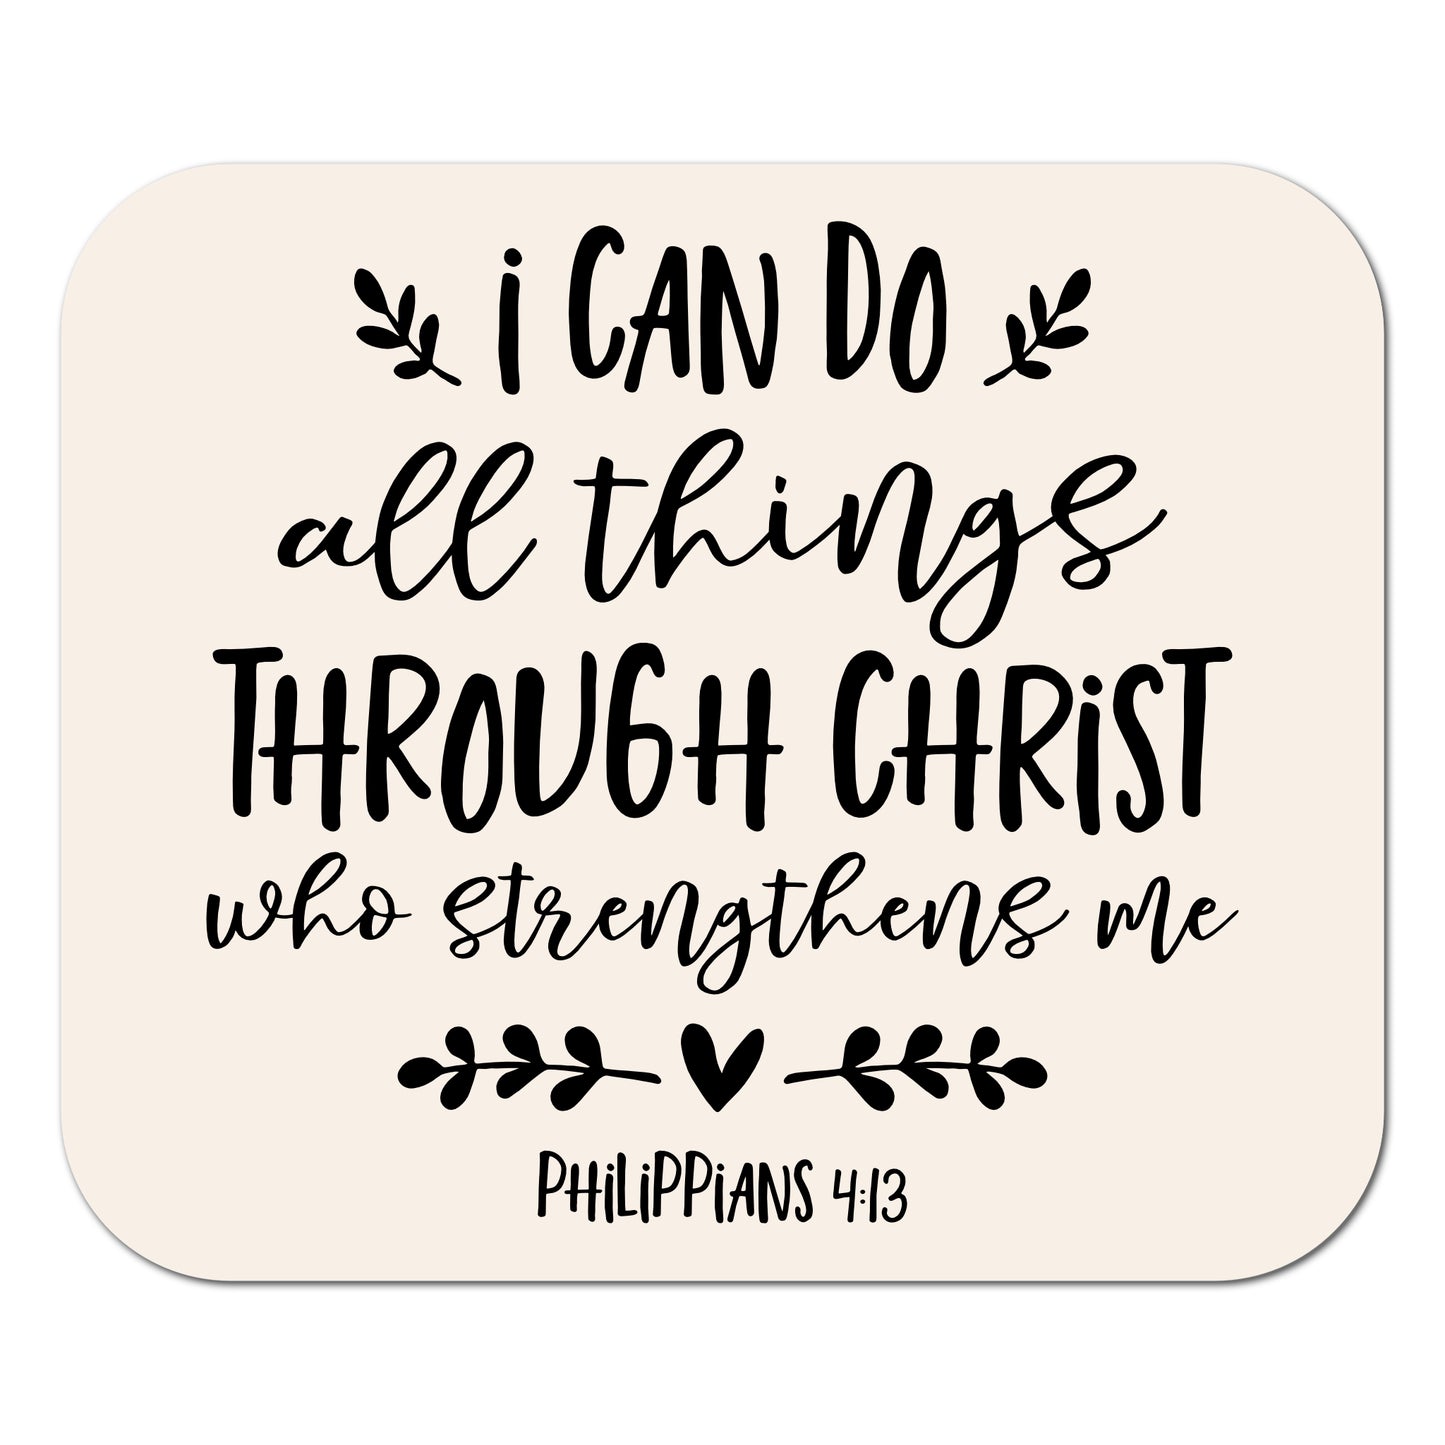 I can do all things through Christ who strengthens me - Philippians 4:13, Mouse Pad, Laptop, Computer Accessories, Bible Verse, Scripture, Office, Decor, Desktop, Christian Gift